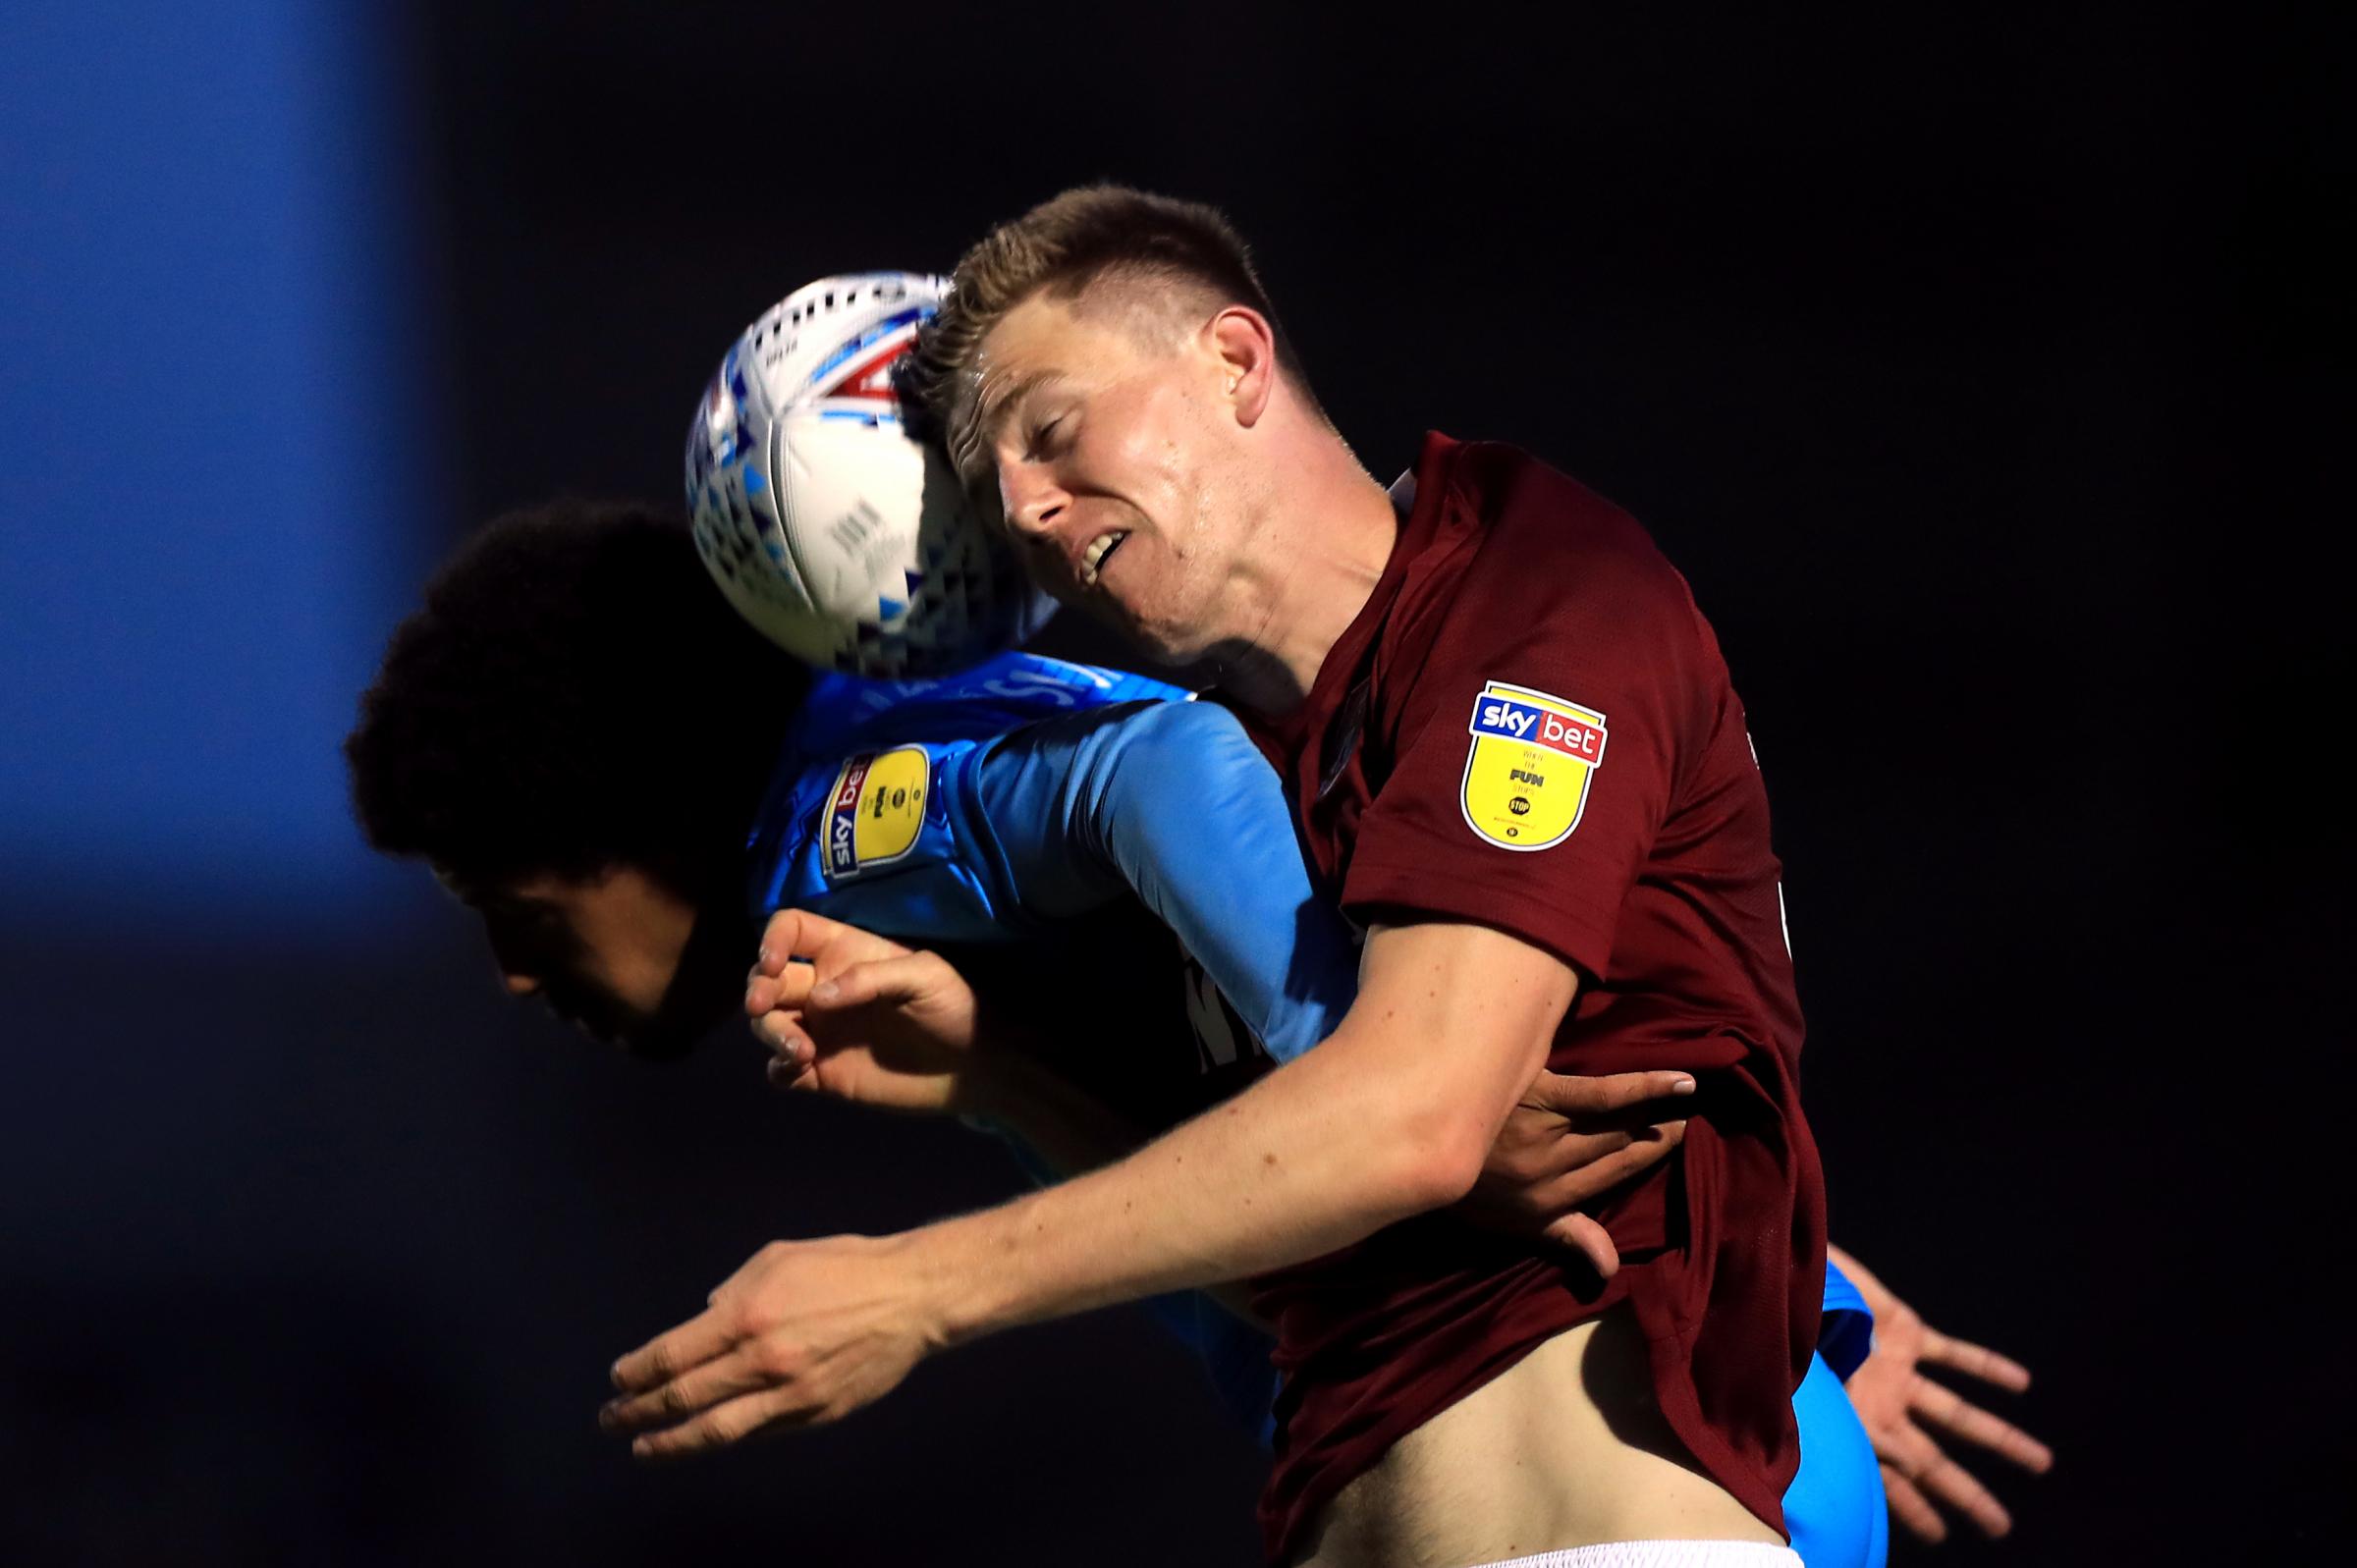 Northampton Towns Scott Wharton and Cheltenham Towns Jonte Smith (left) battle for the ball during the Sky Bet League Two play-off semi final first leg match at the PTS Academy Stadium, Northampton..